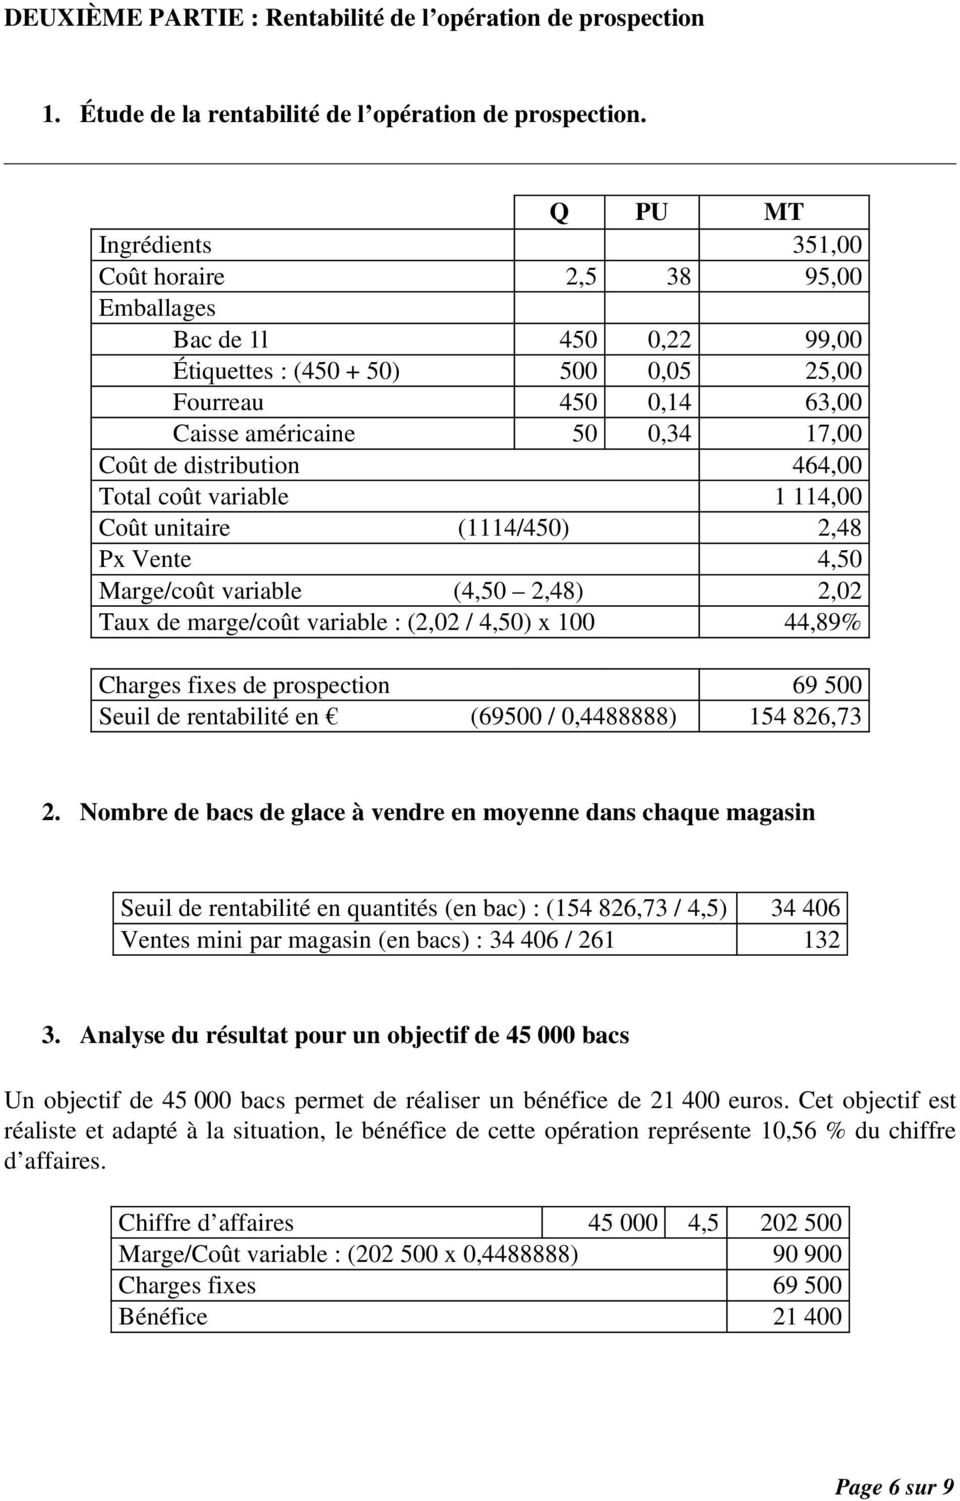 distribution 464,00 Total coût variable 1 114,00 Coût unitaire (1114/450) 2,48 Px Vente 4,50 Marge/coût variable (4,50 2,48) 2,02 Taux de marge/coût variable : (2,02 / 4,50) x 100 44,89% Charges